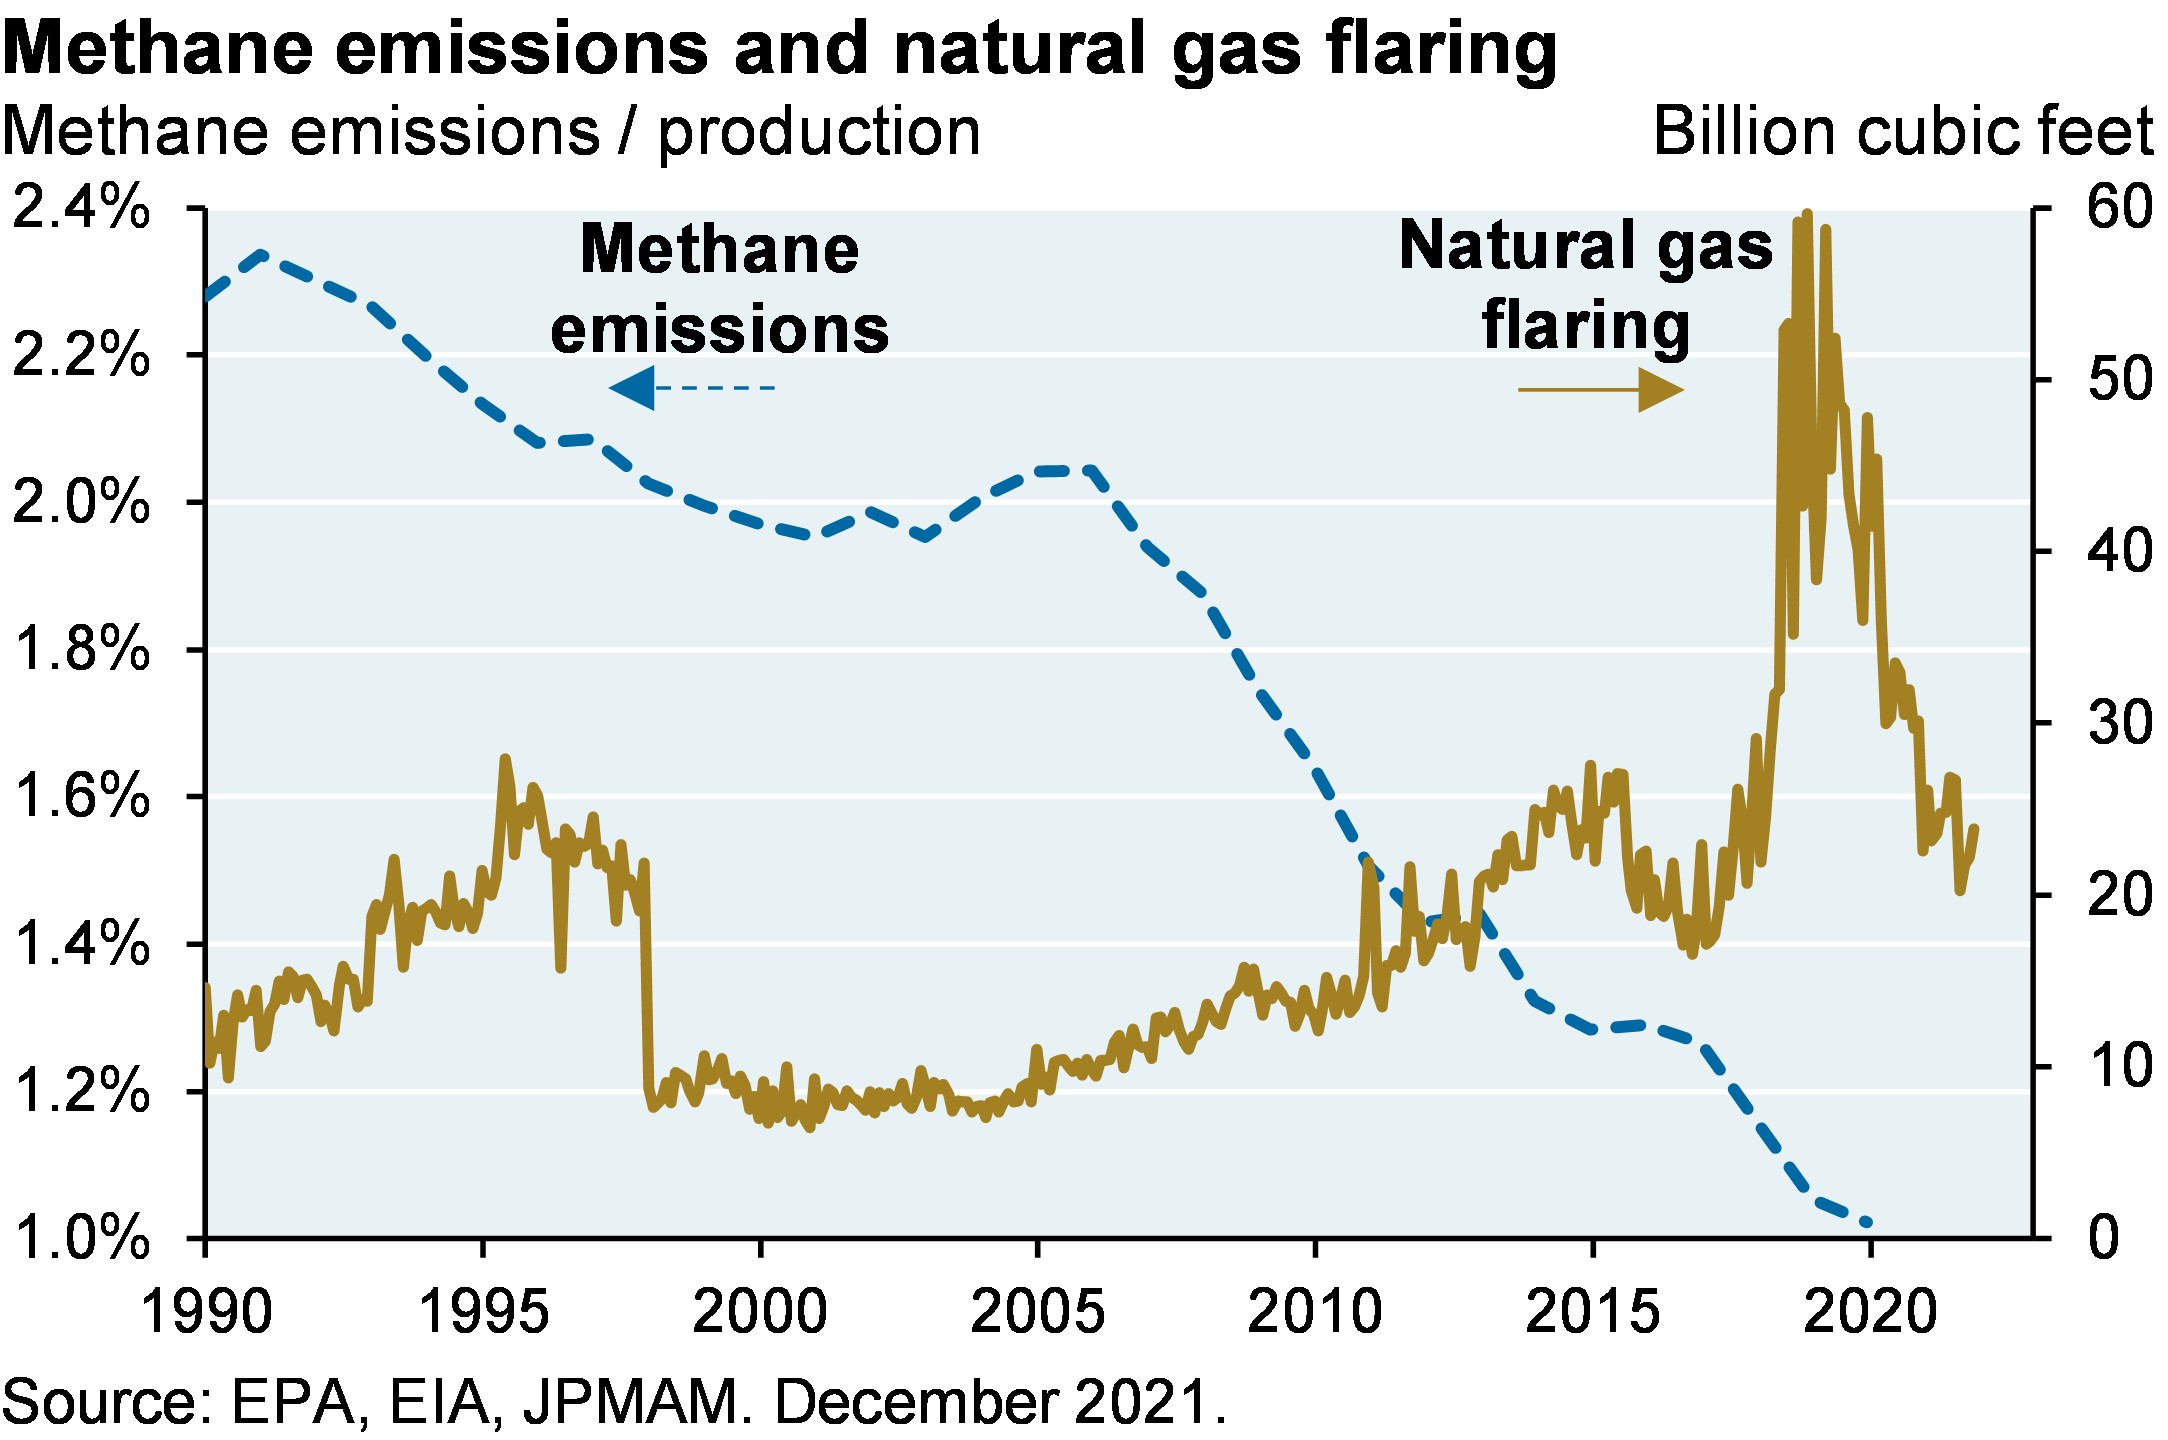 Methane emissions and natural gas flaring